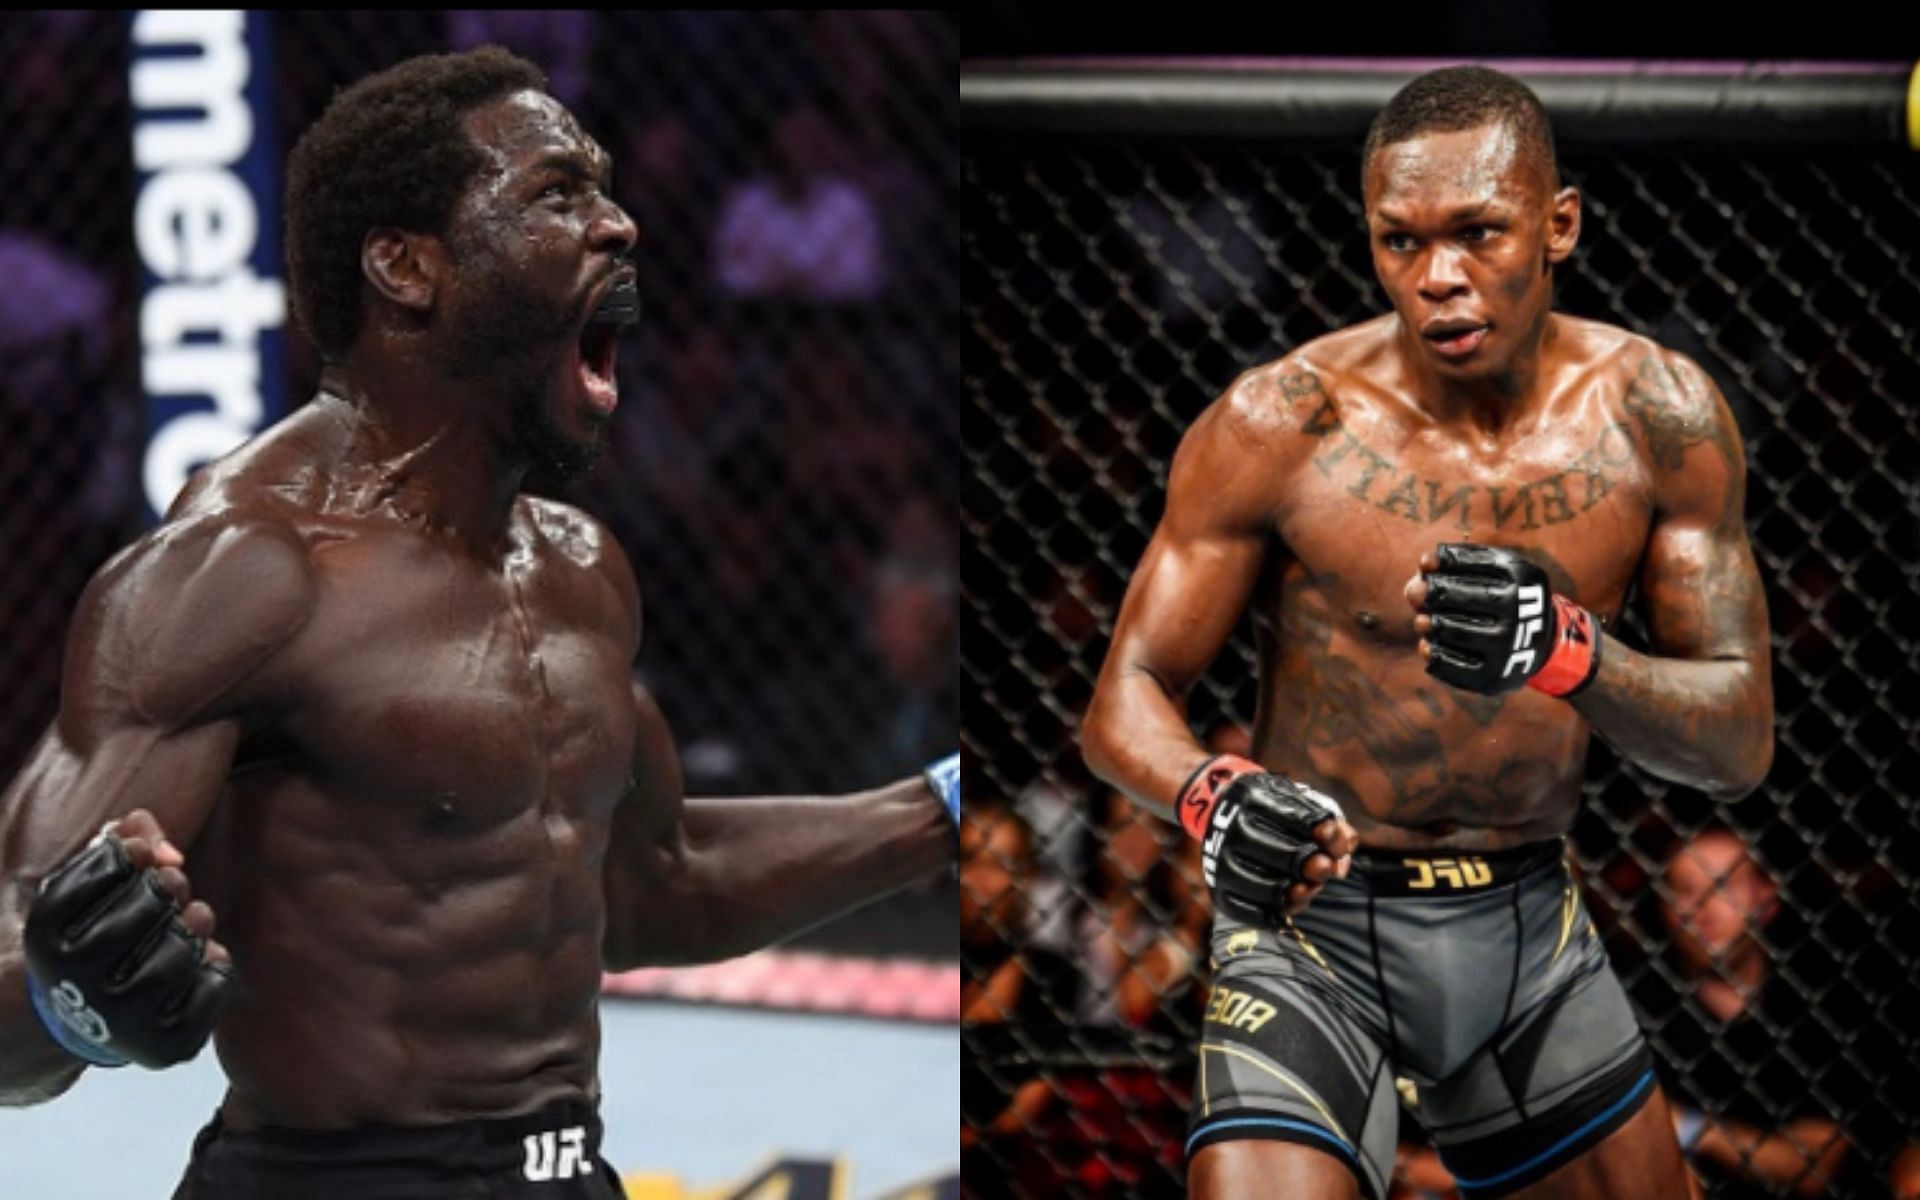 Jared Cannonier is sure that he will be fighting Israel Adesanya for the title next: 'I’m confident of it happening'